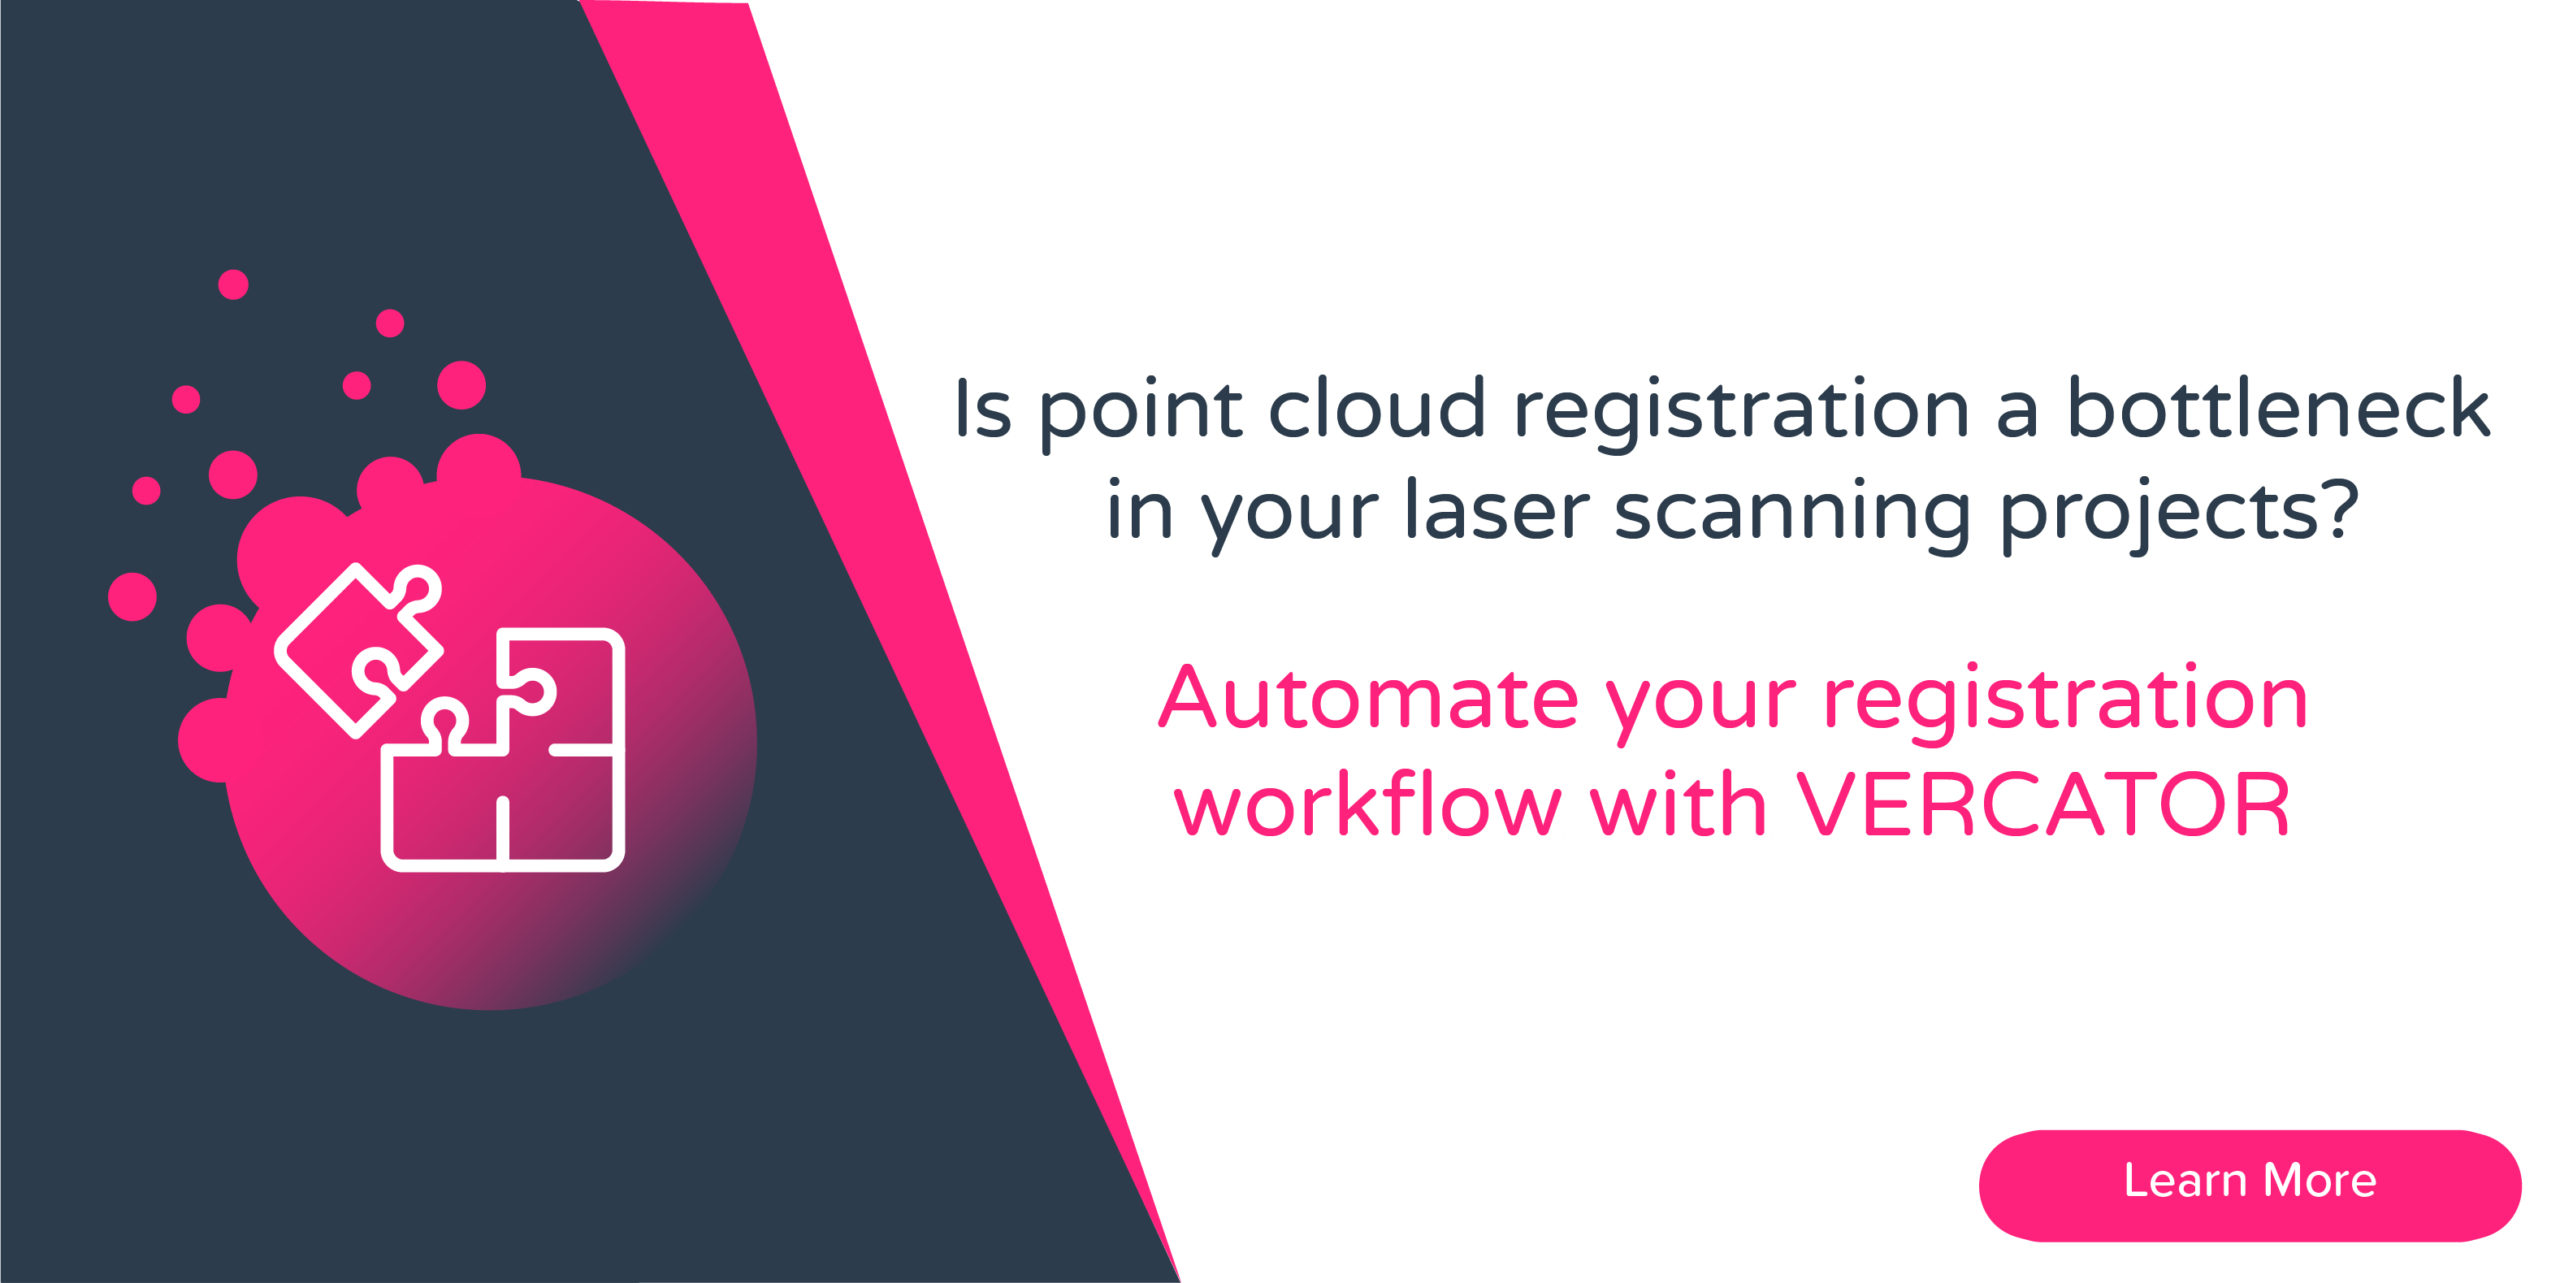 Automate your registration workflow with VERCATOR